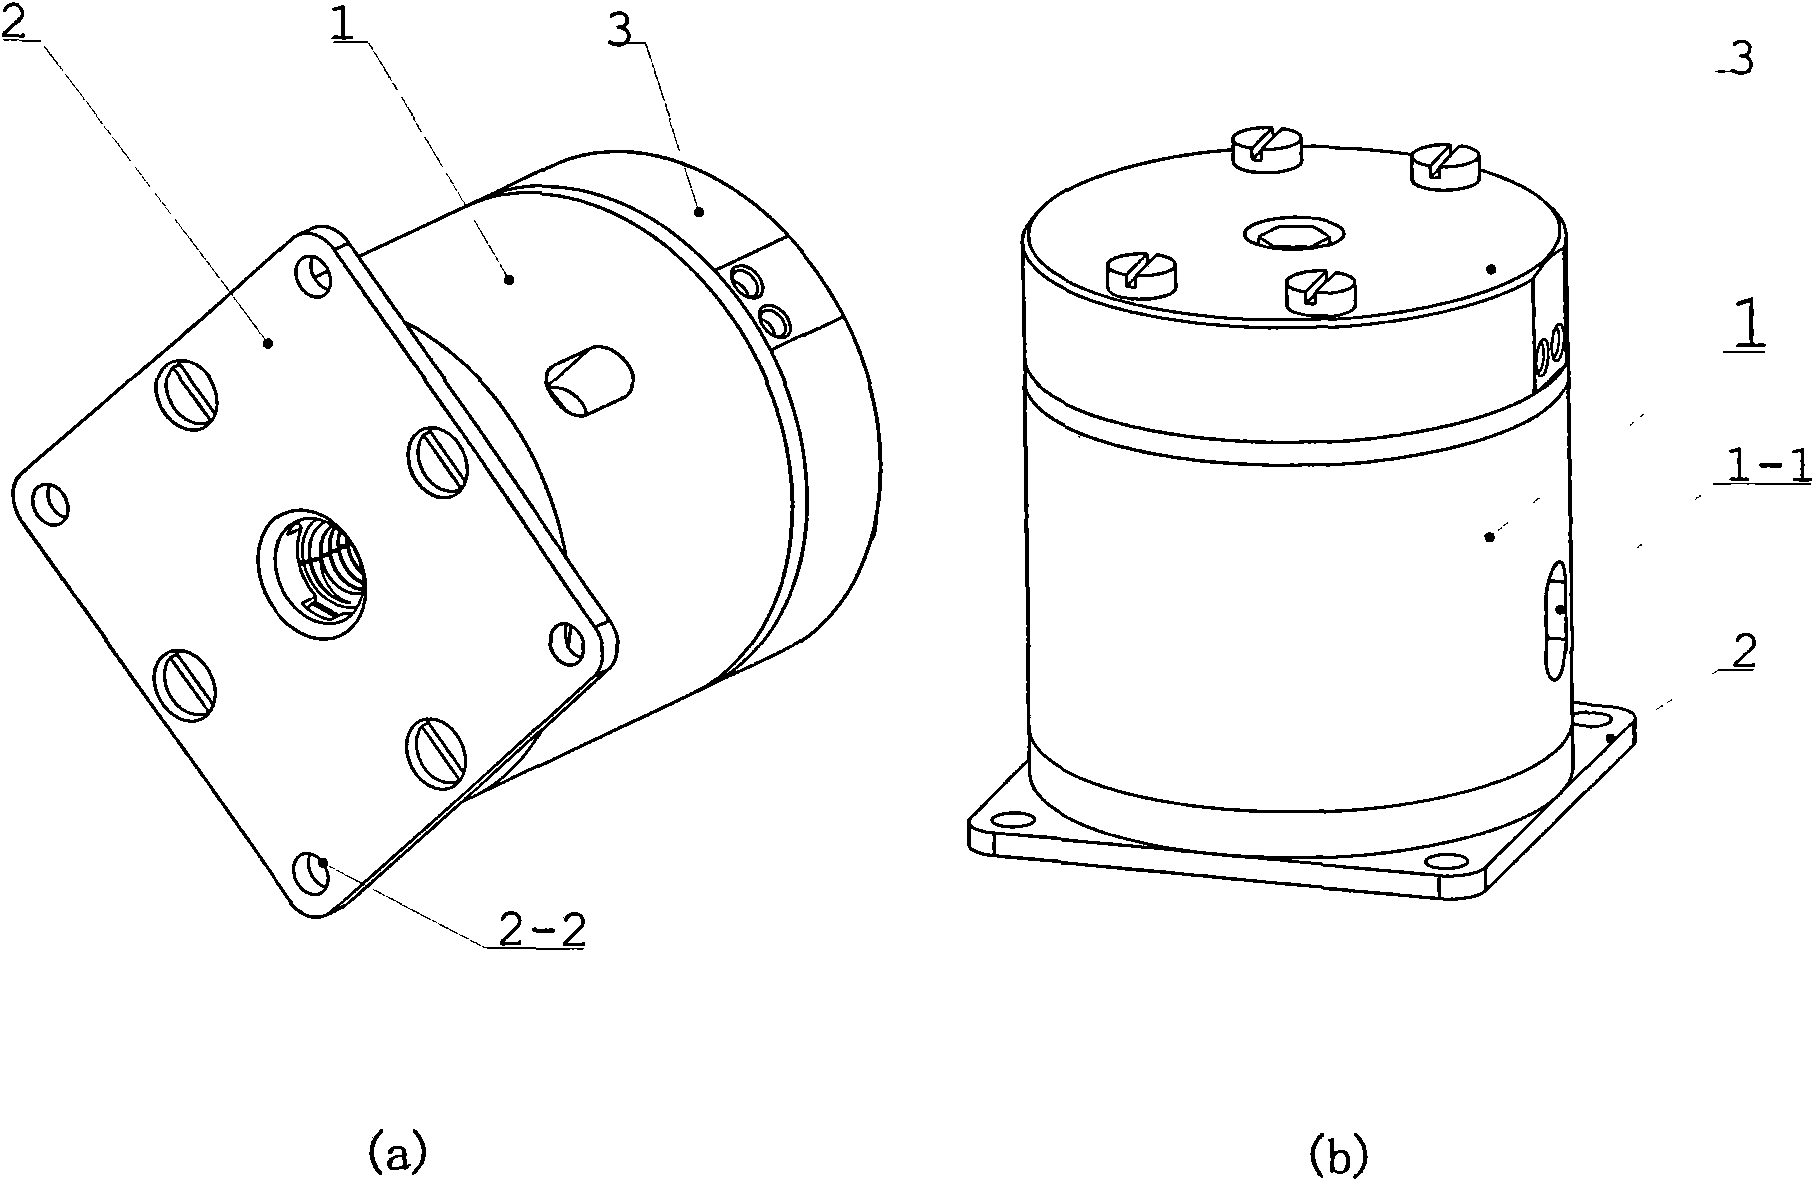 Locking-unlocking device driven by two-stage redundancy